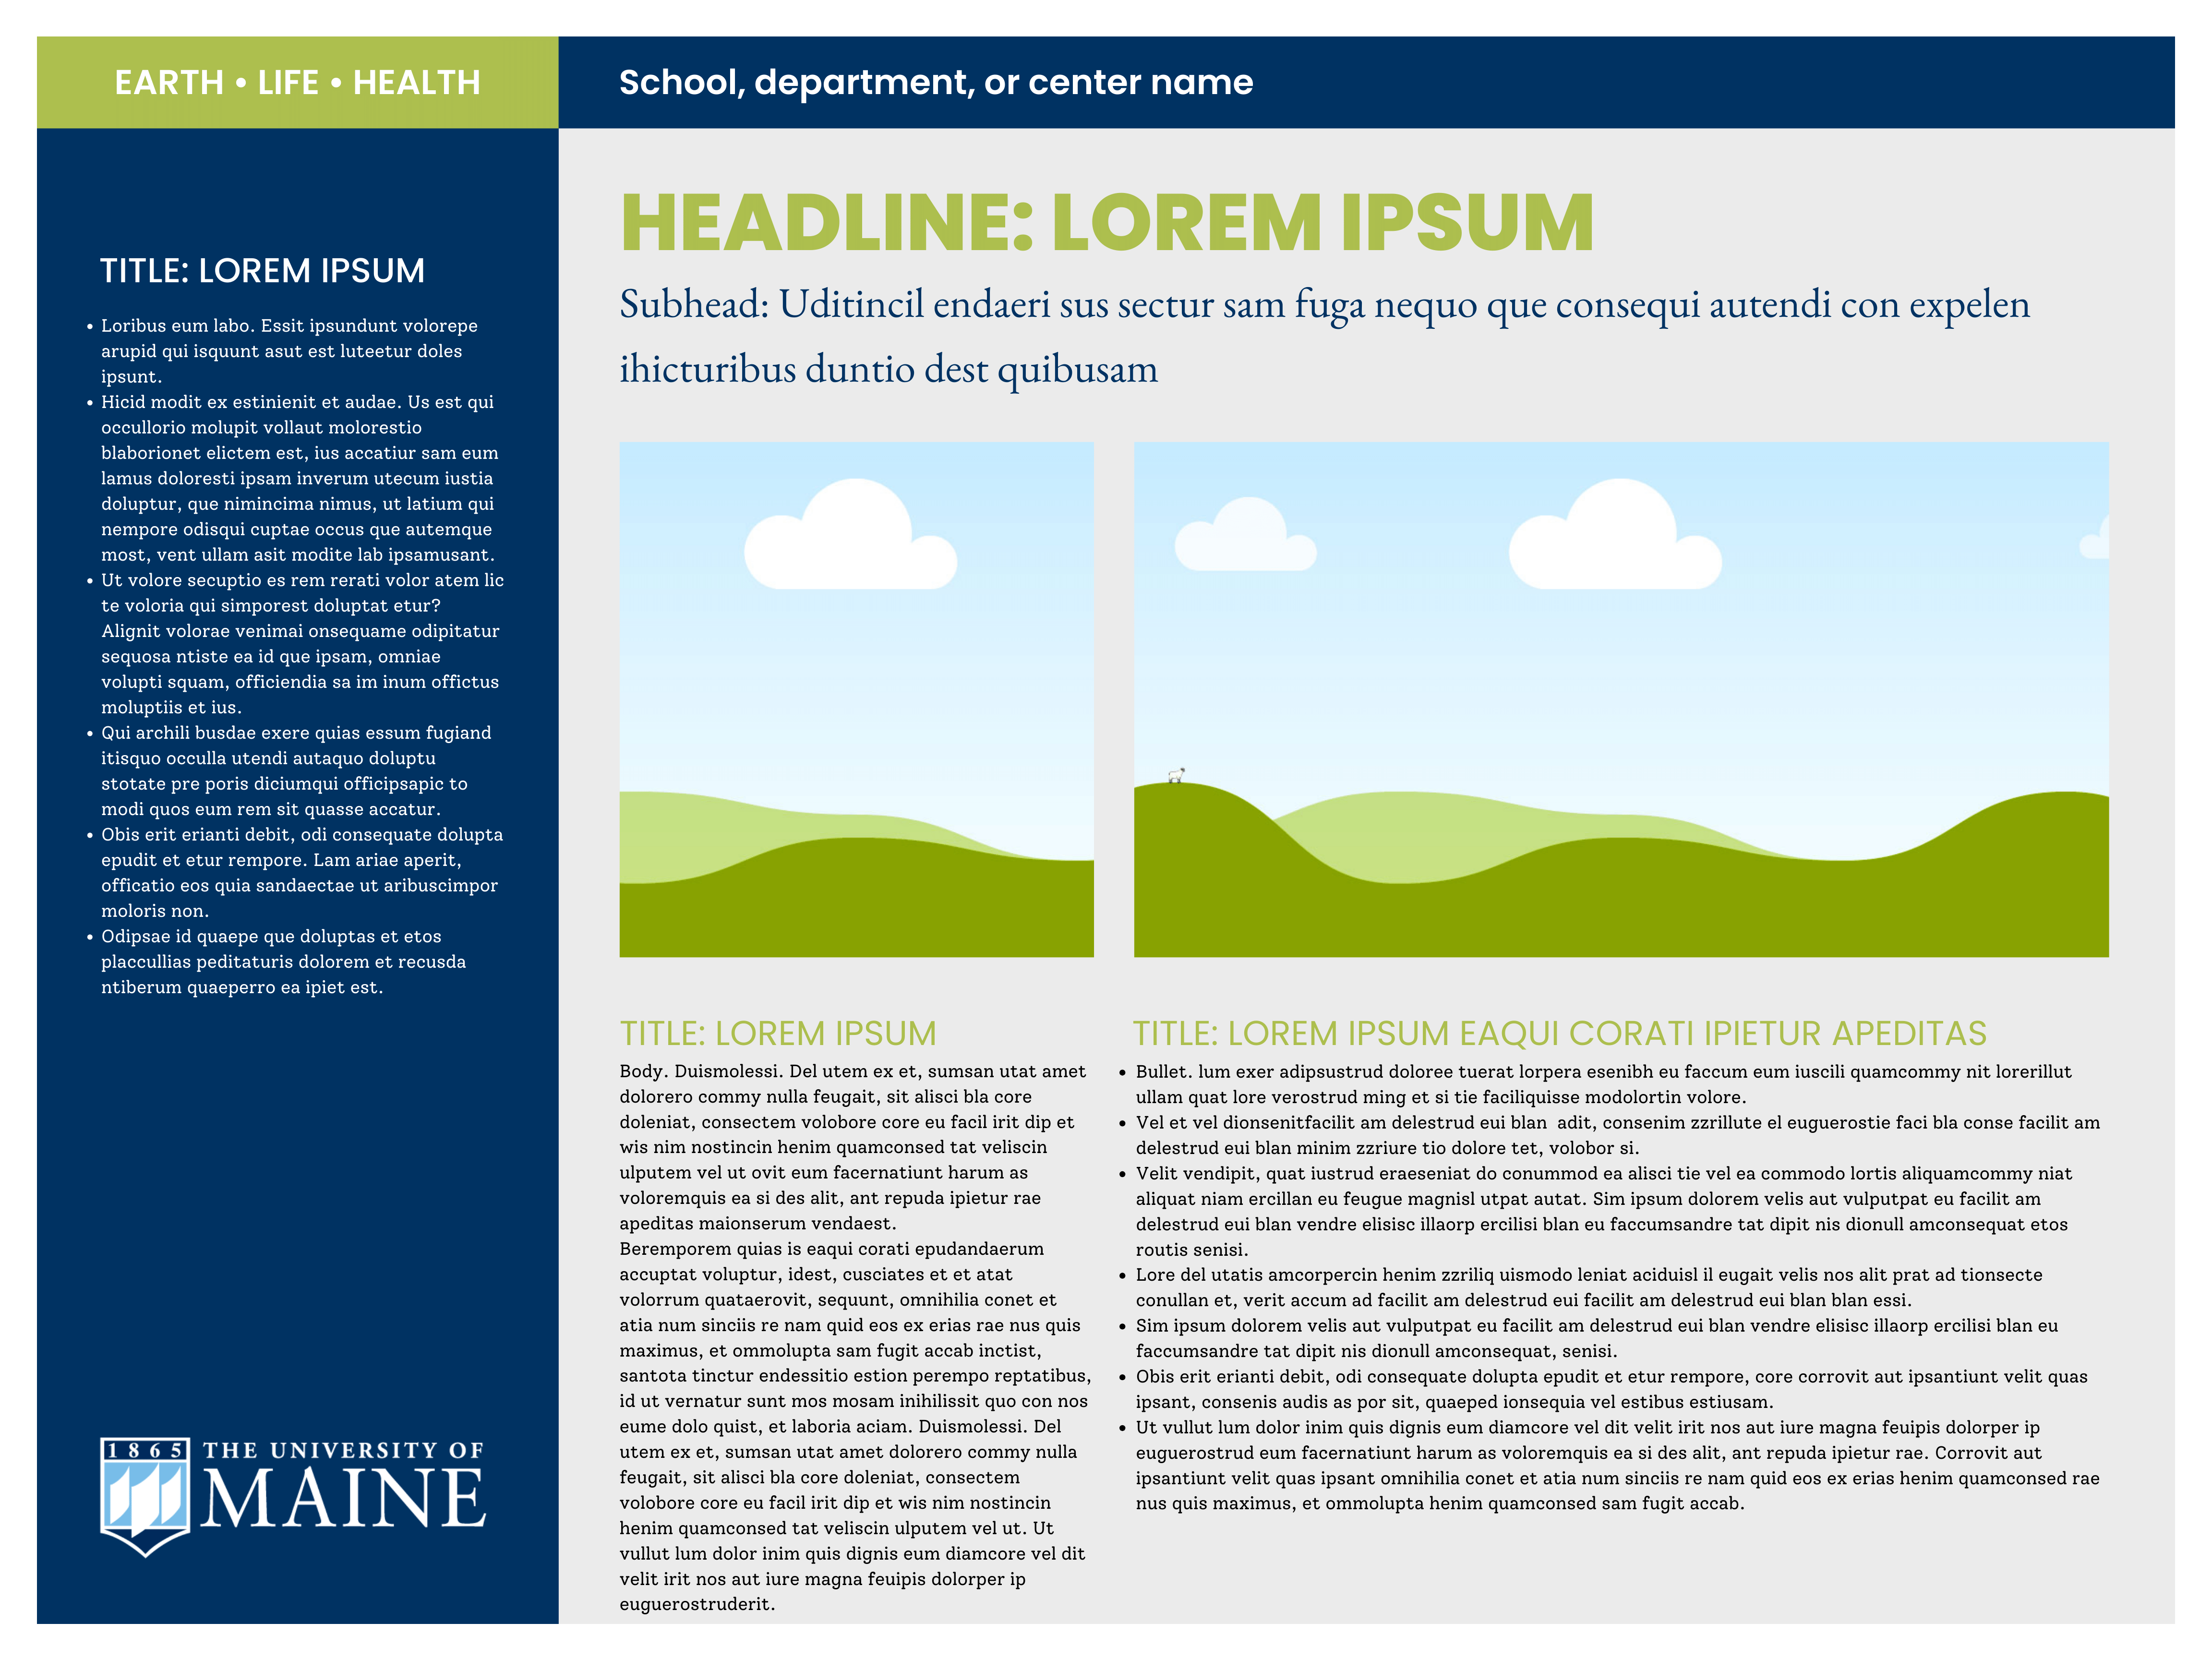 A research poster template with three columns and in a blue and green color palette.